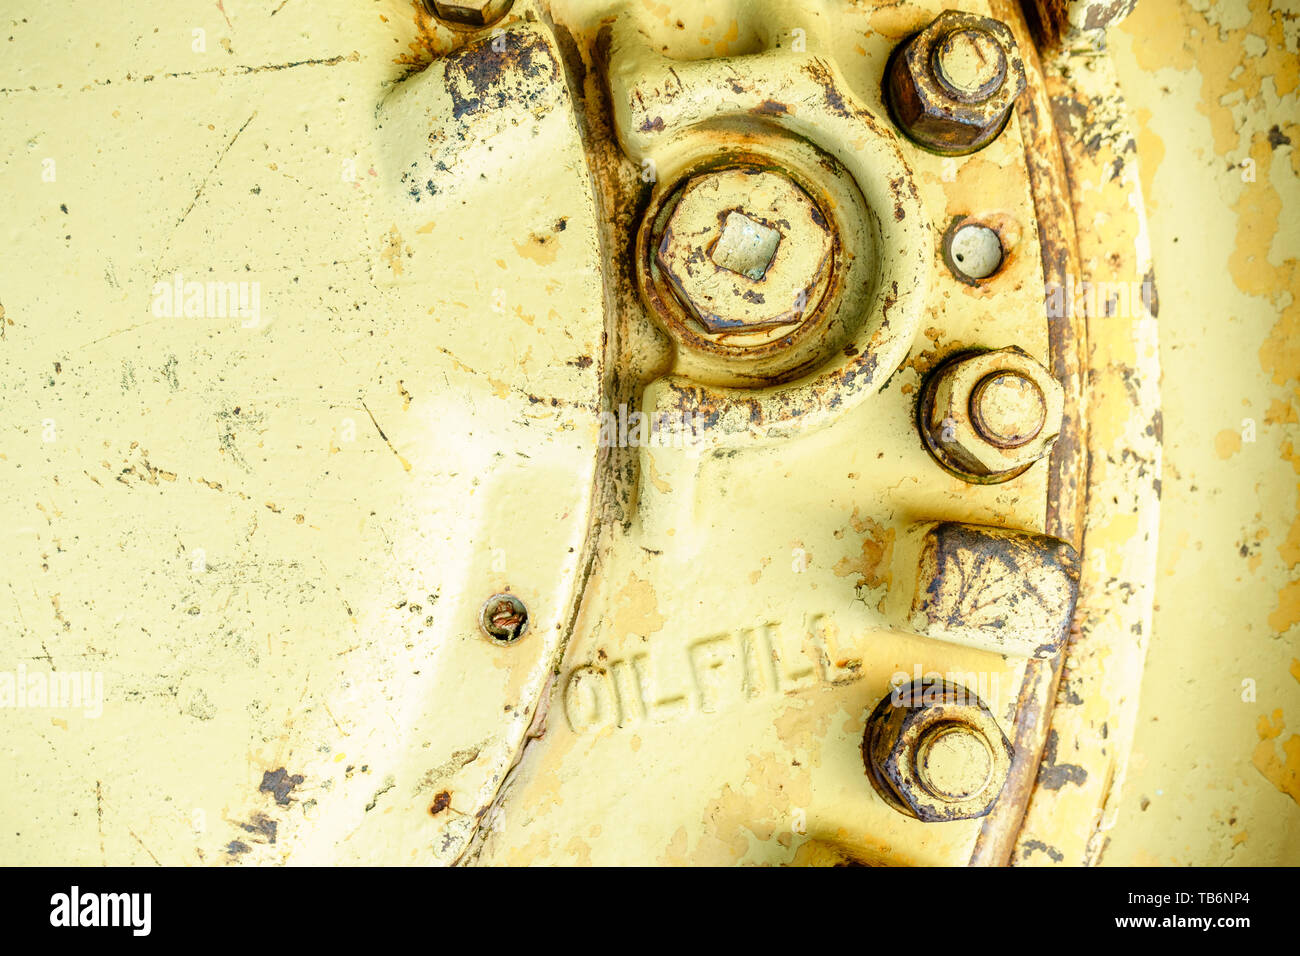 Close-up image of old machinery part with oil fill port Stock Photo